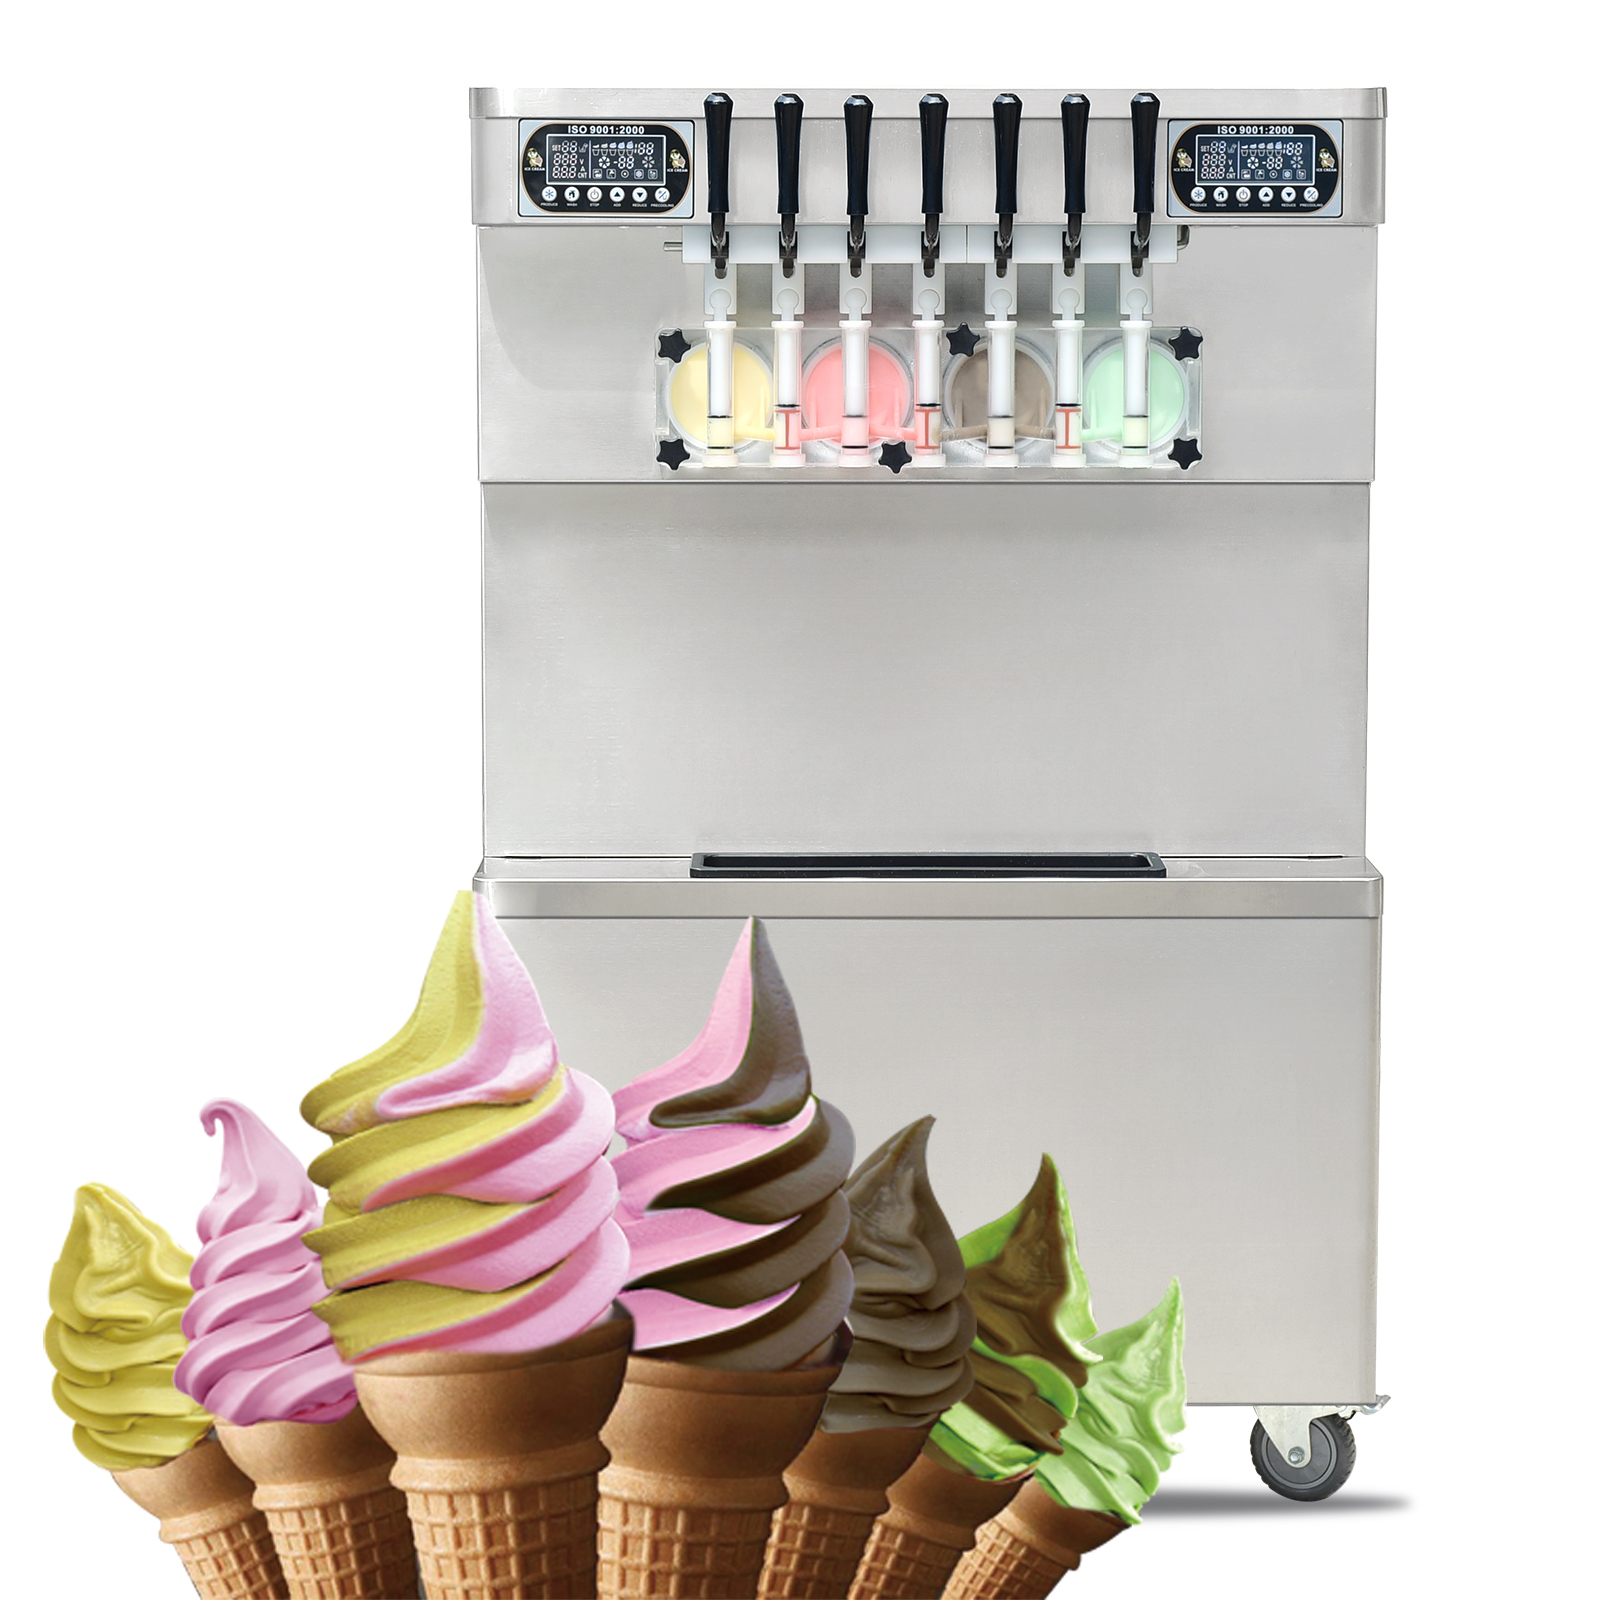 https://images.51microshop.com/4053/product/20220215/Kolice_High_production_capacity_7_flavors_4_3_mixed_soft_serve_ice_cream_machine_upper_tanks_refrigerated_1644912458246_2.jpg